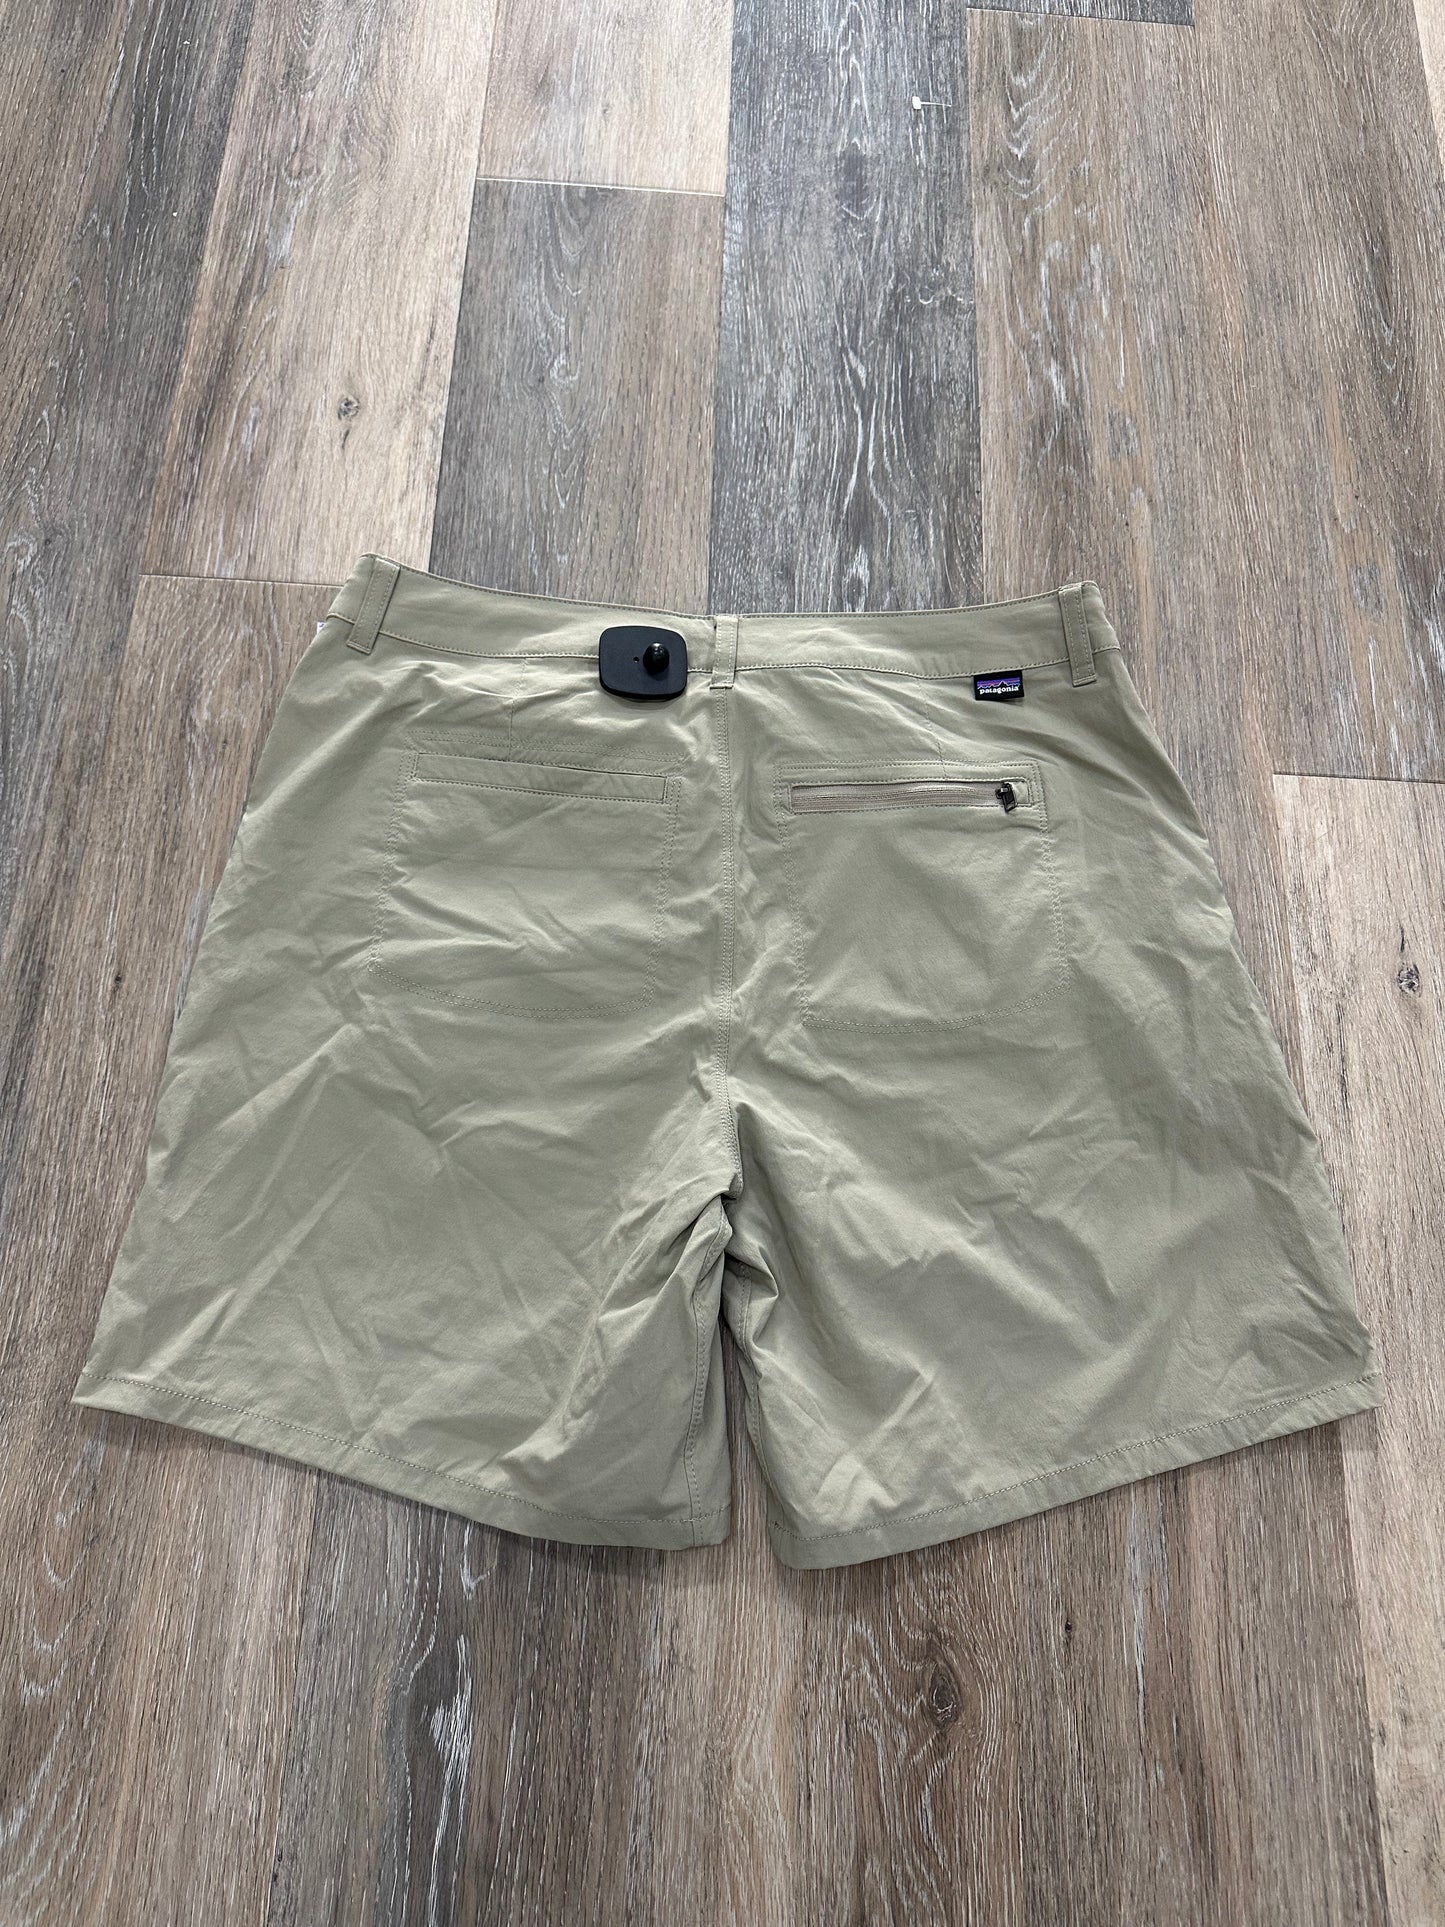 Athletic Shorts By Patagonia  Size: 10